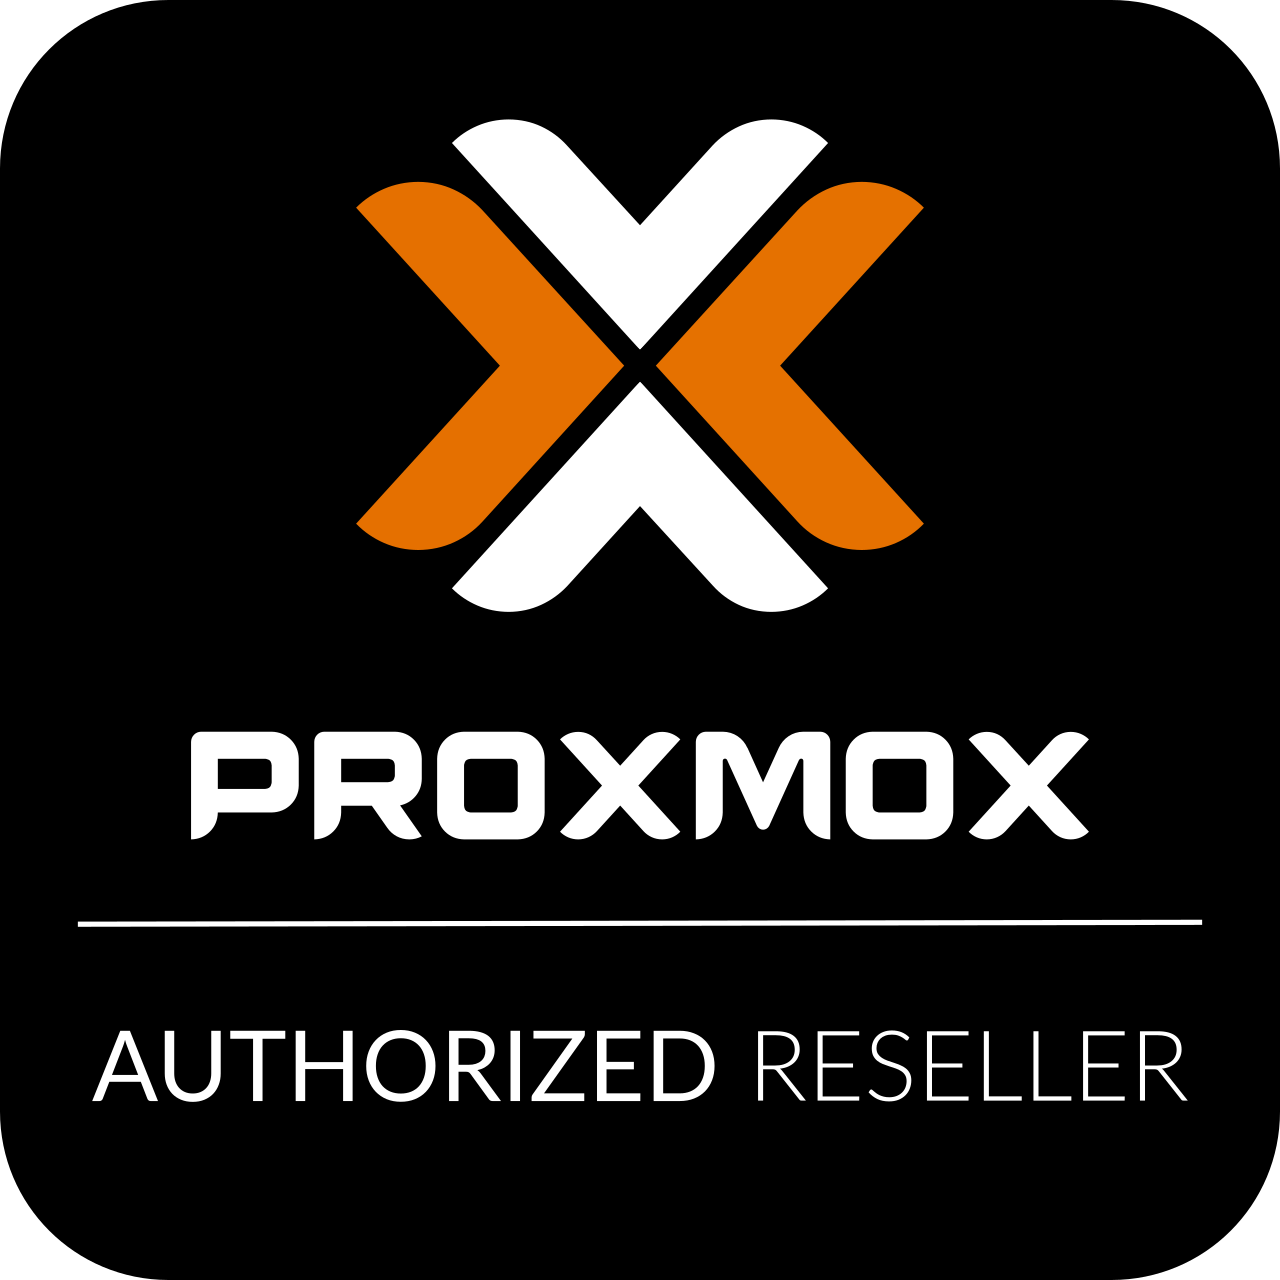 proxmox authorized reseller logo inverted color 1280px